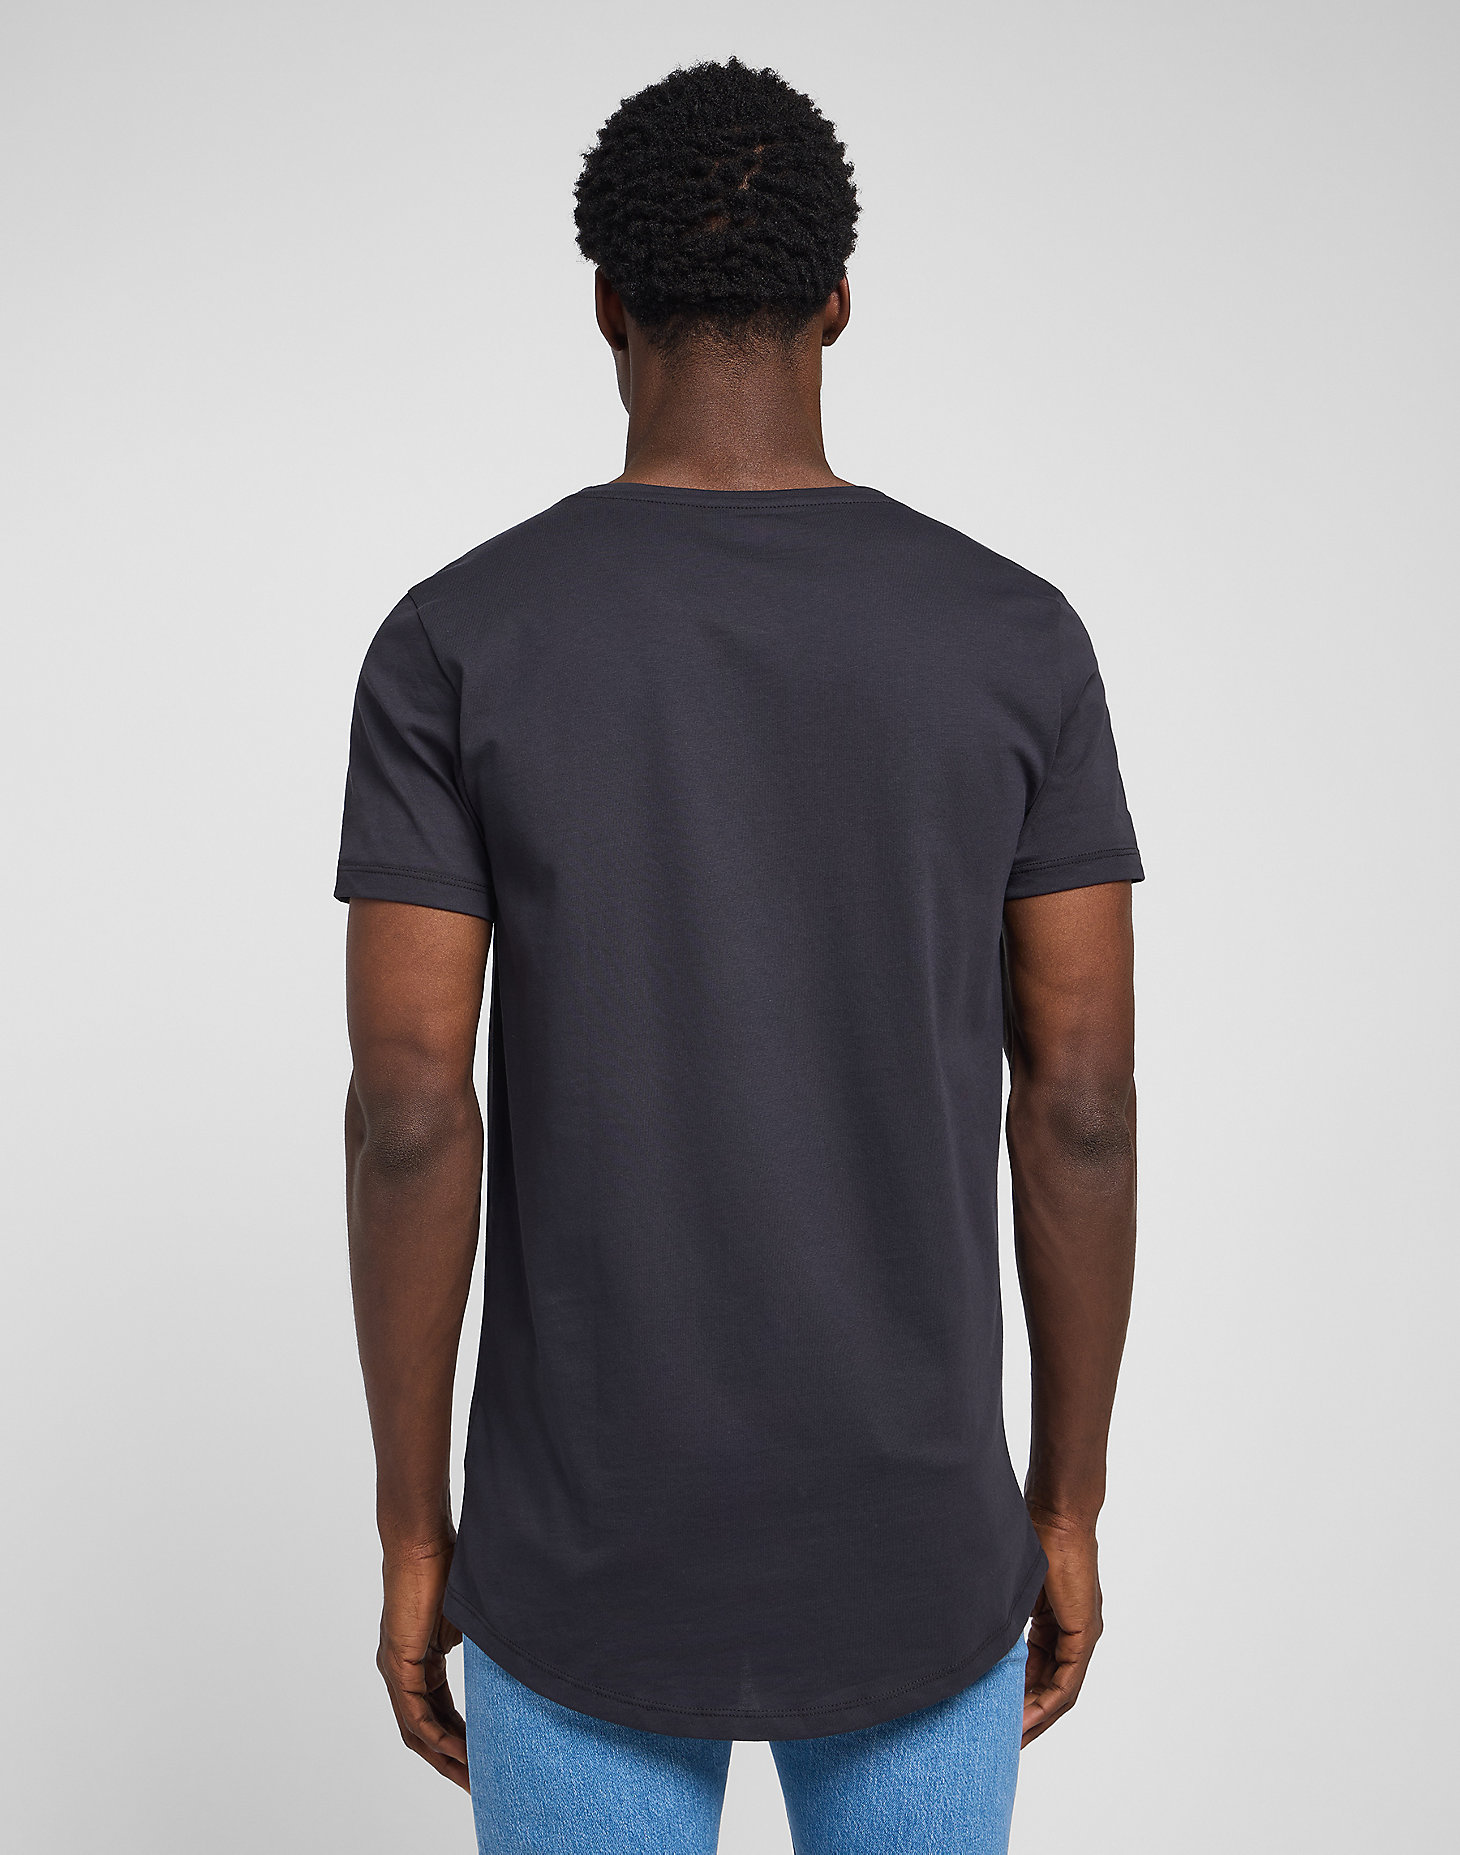 Shaped Tee in Washed Black alternative view 1